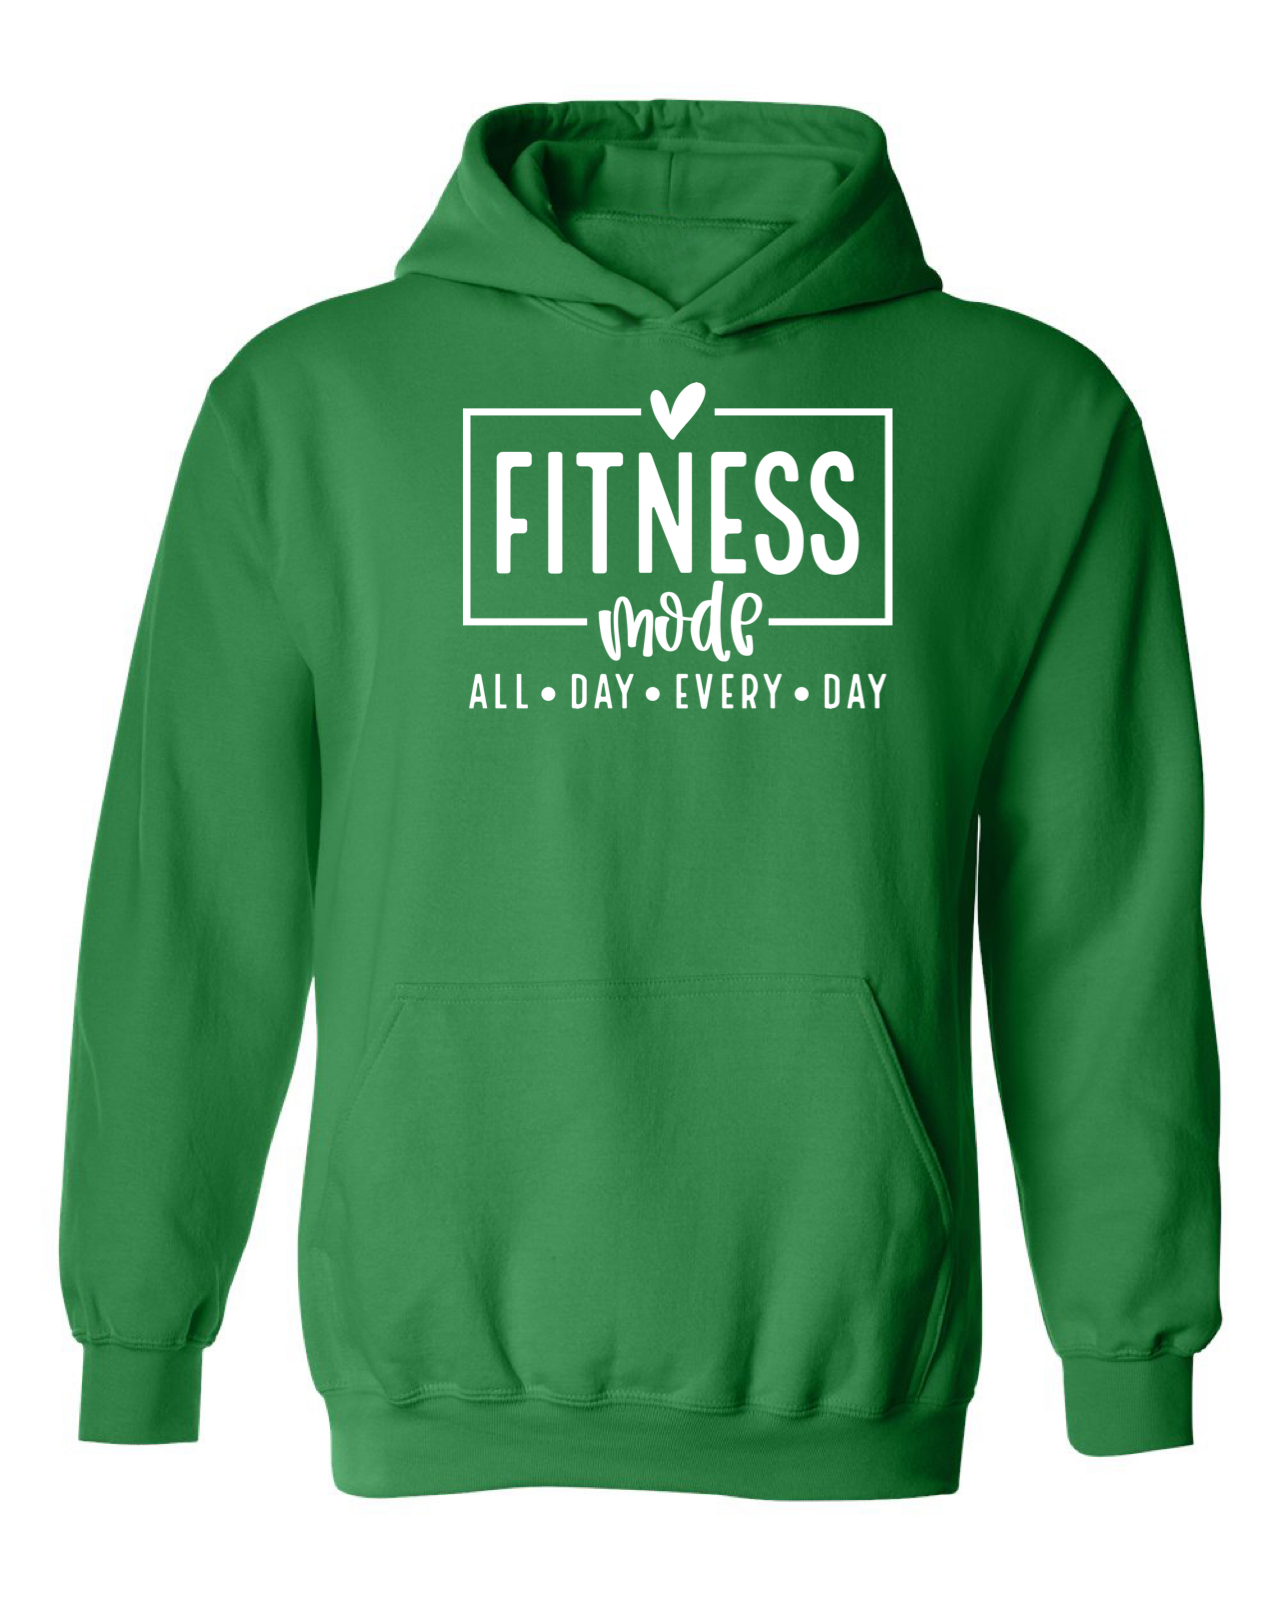 Fitness Mode Bright Colors Hoodie